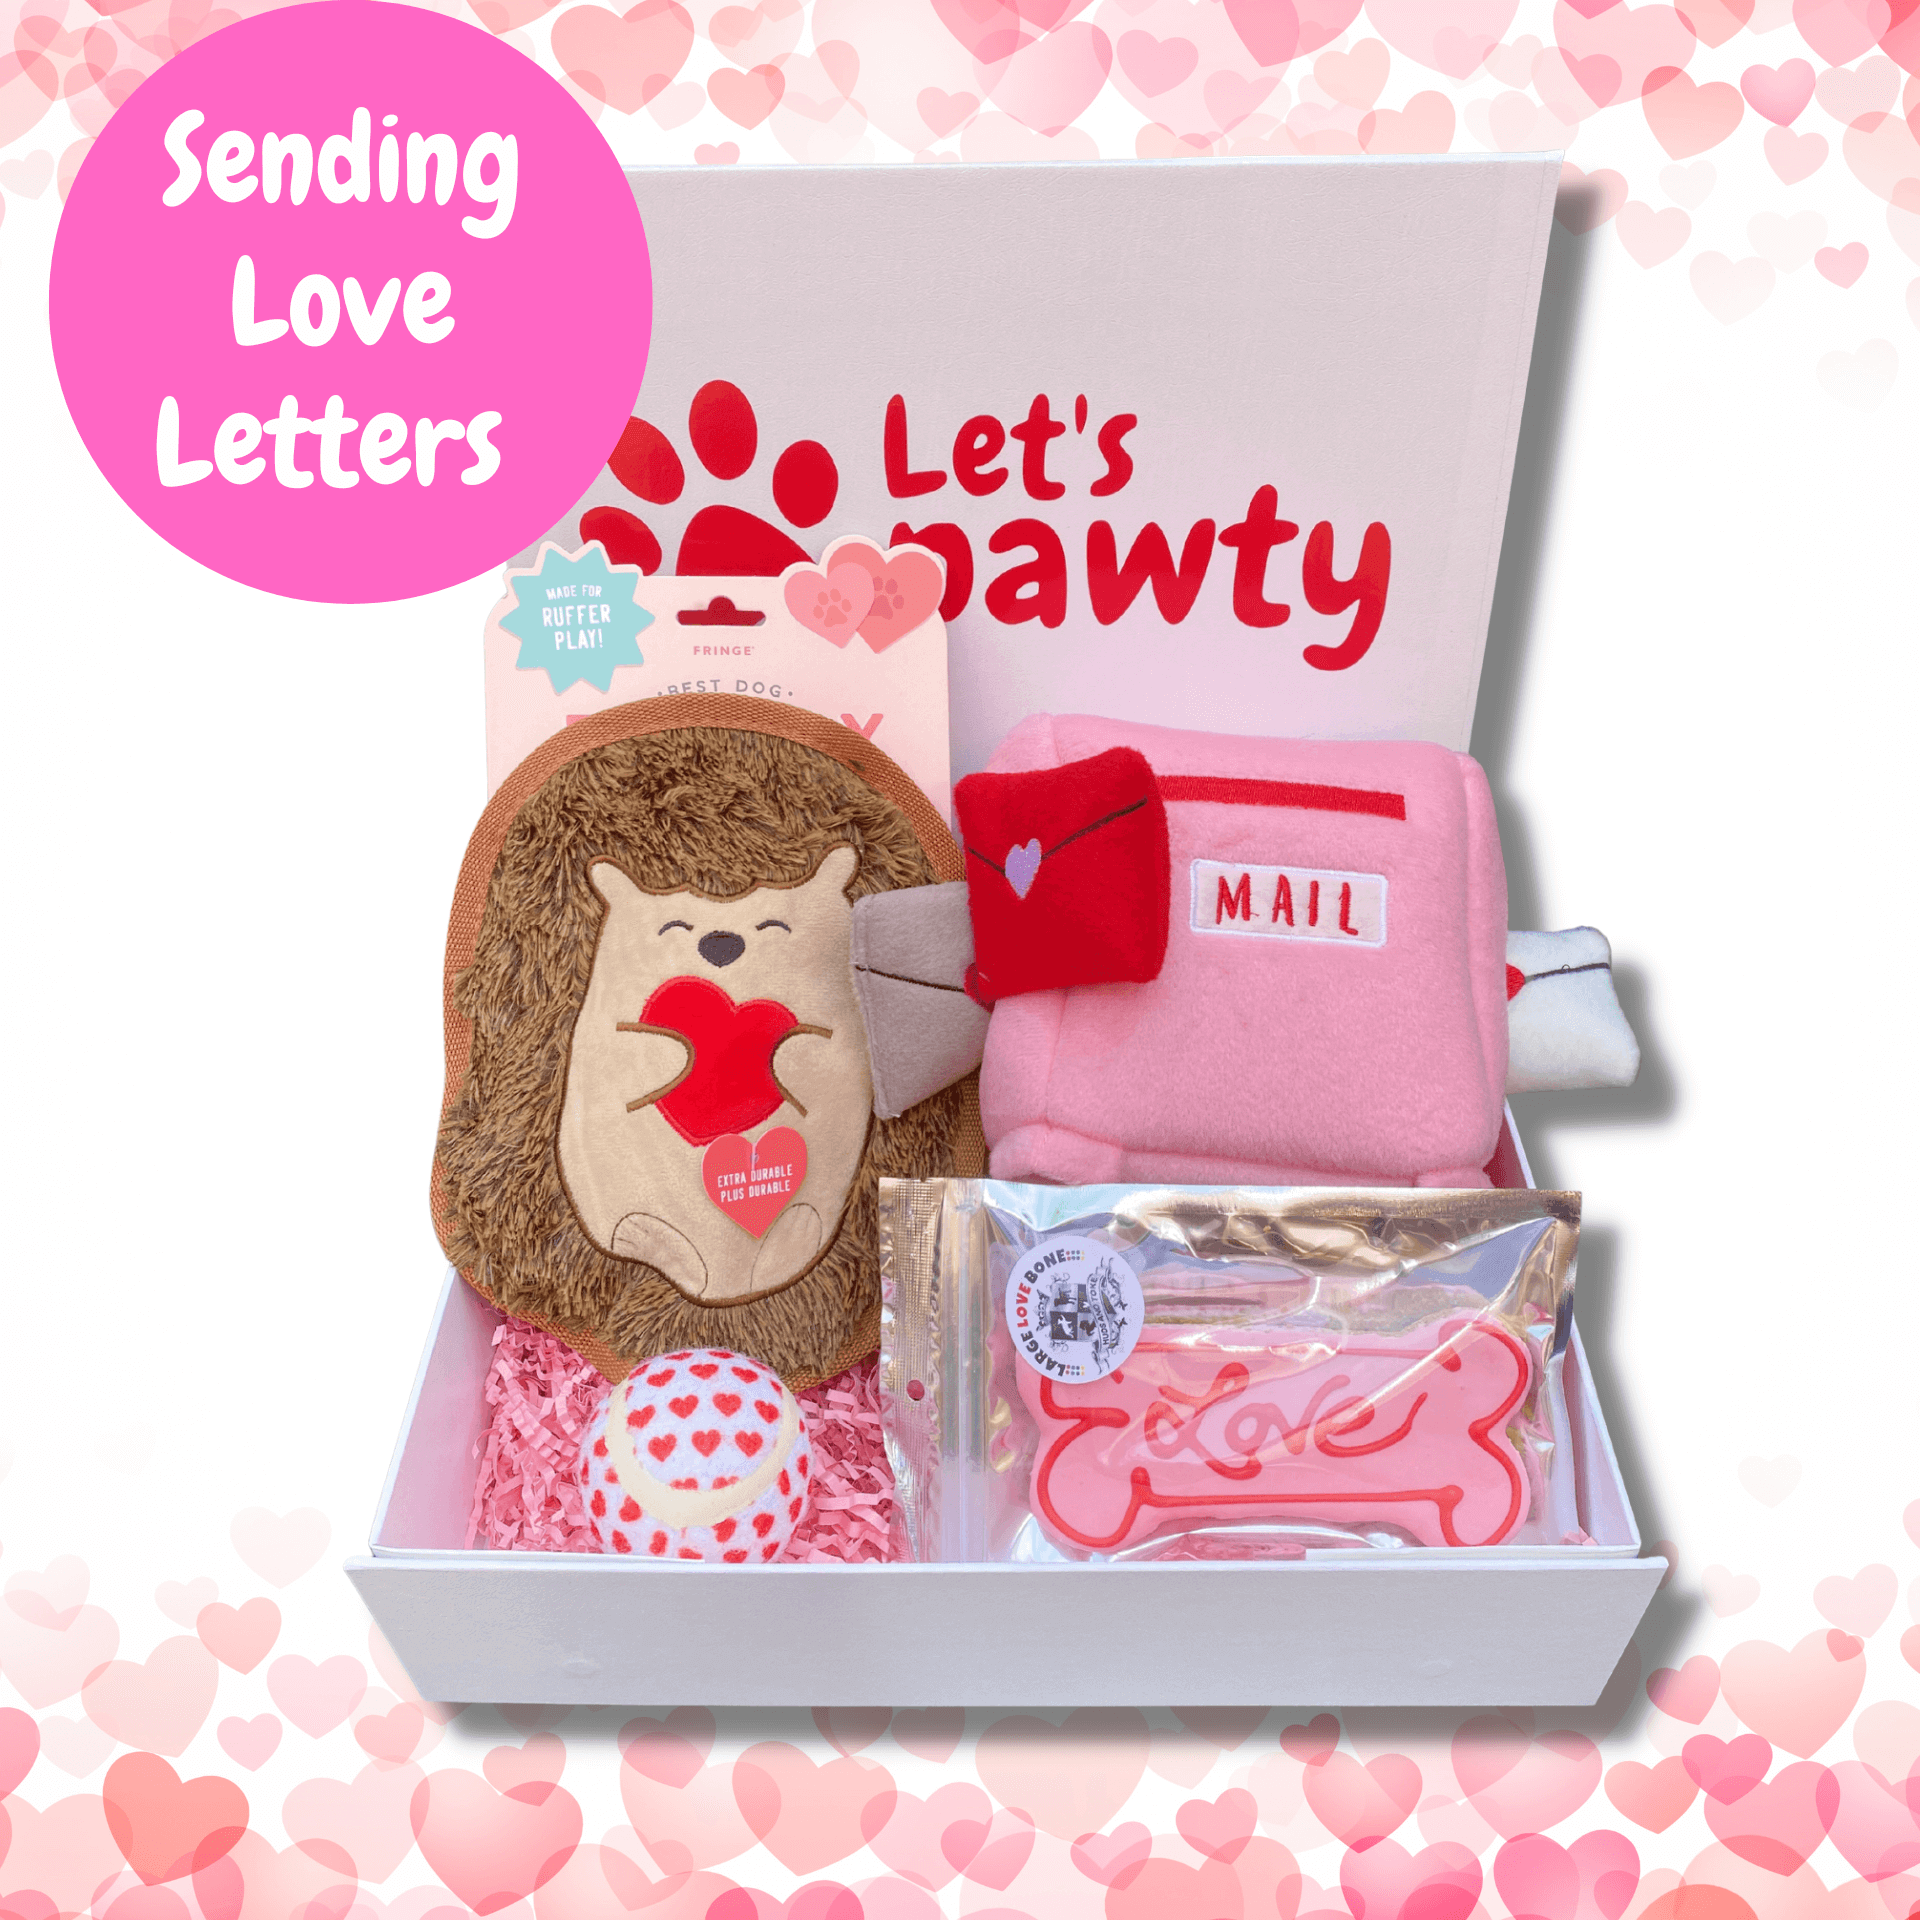 Valentine themed dog gift box with dog toys, dog treats and tennis ball, let's pawty